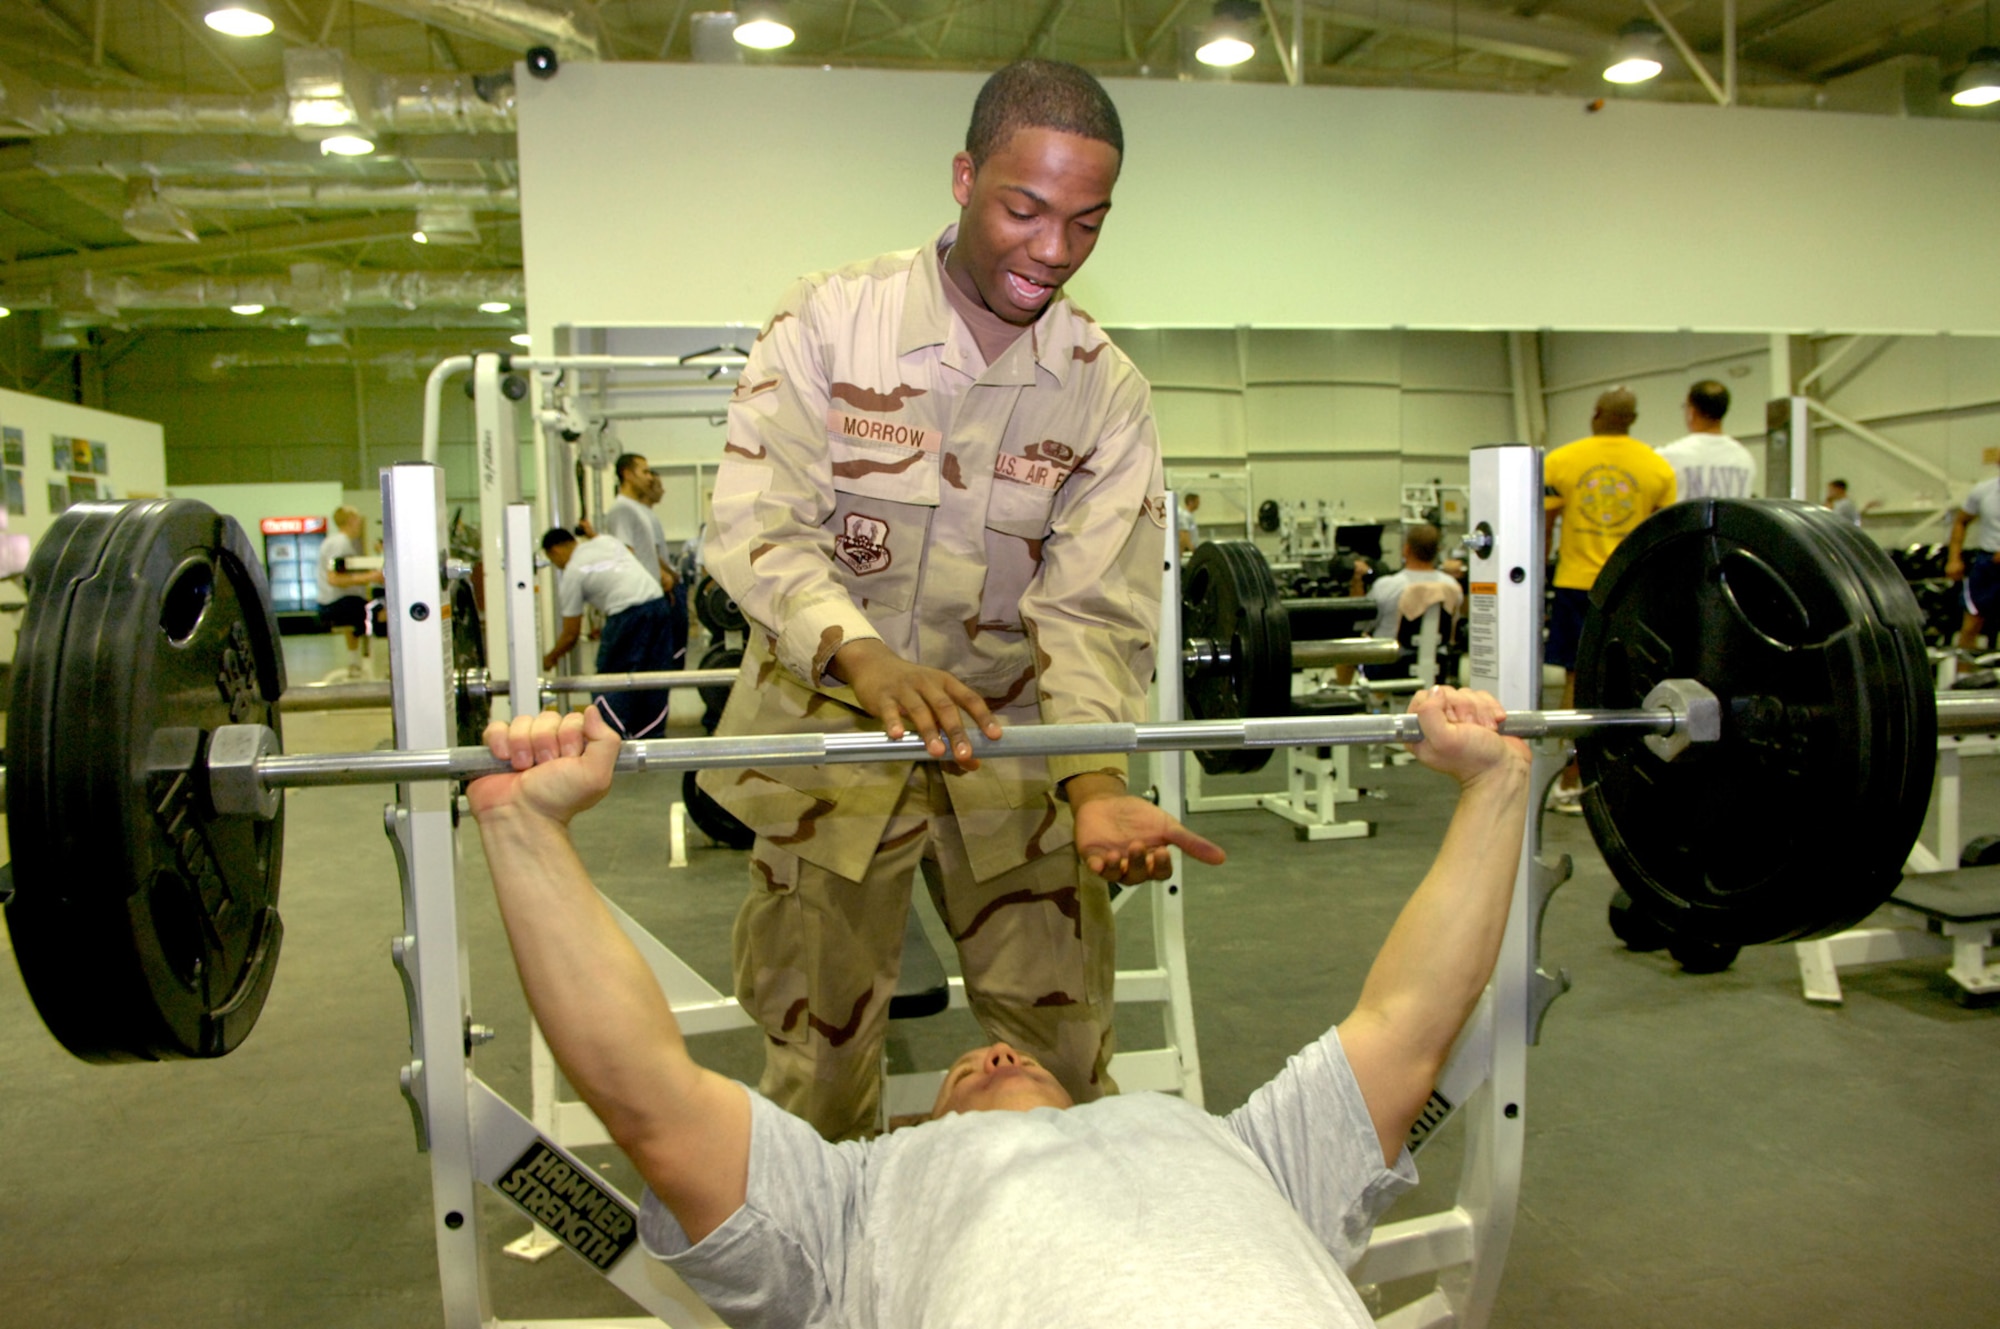 Airman Aaron Morrow spots a fellow Airman on the bench press at the base fitness center. Airman Morrow is a certified fitness trainer deployed from the 366th Services Squadron at Mountain Home AFB, Idaho to the 332nd Expeditionary Services Squadron, Balad AB, Iraq. (U. S. Air Force photo/Staff Sgt. Michael R. Holzworth)